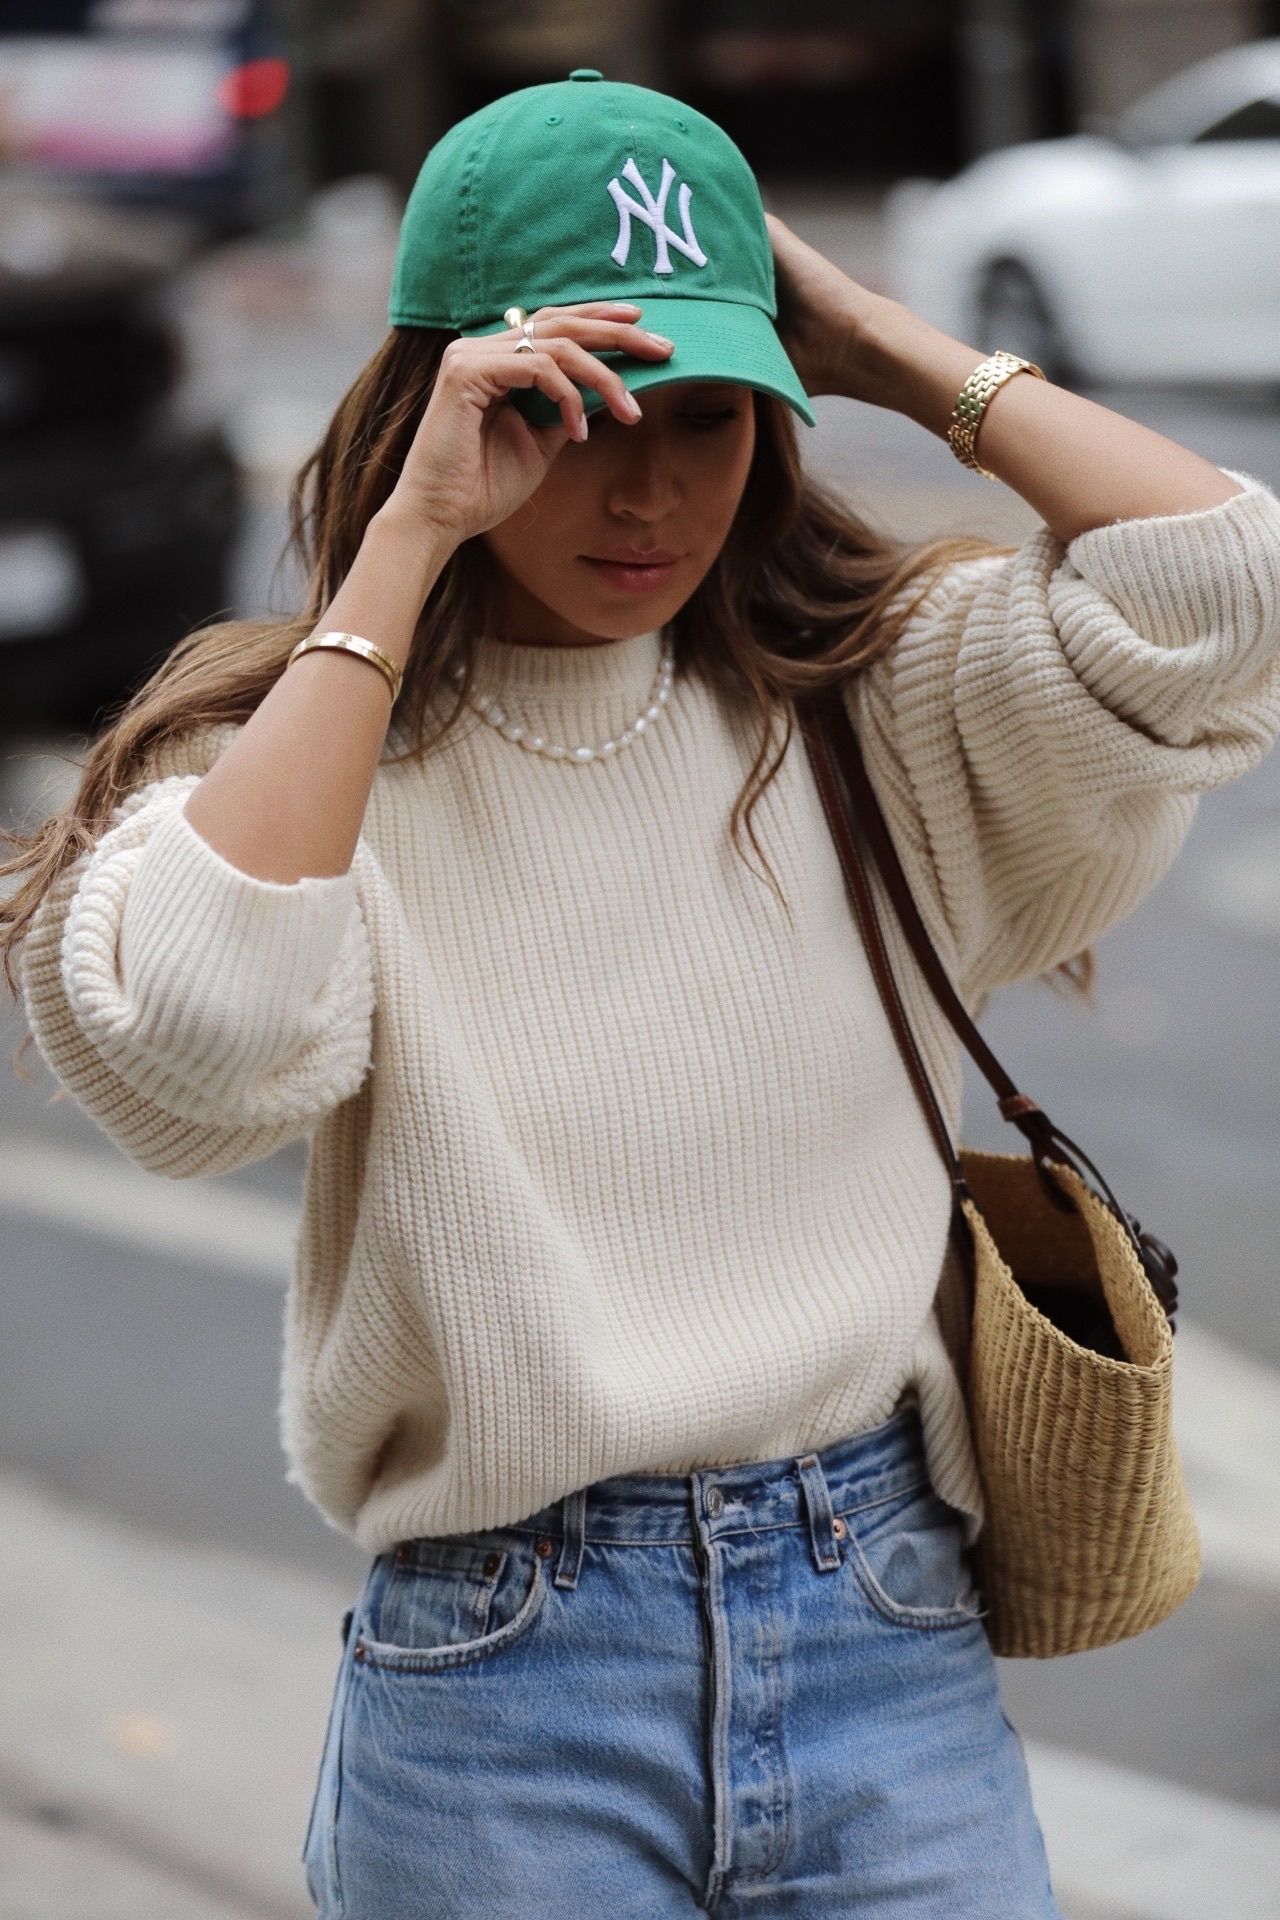 Pick the baseball cap of perfect style